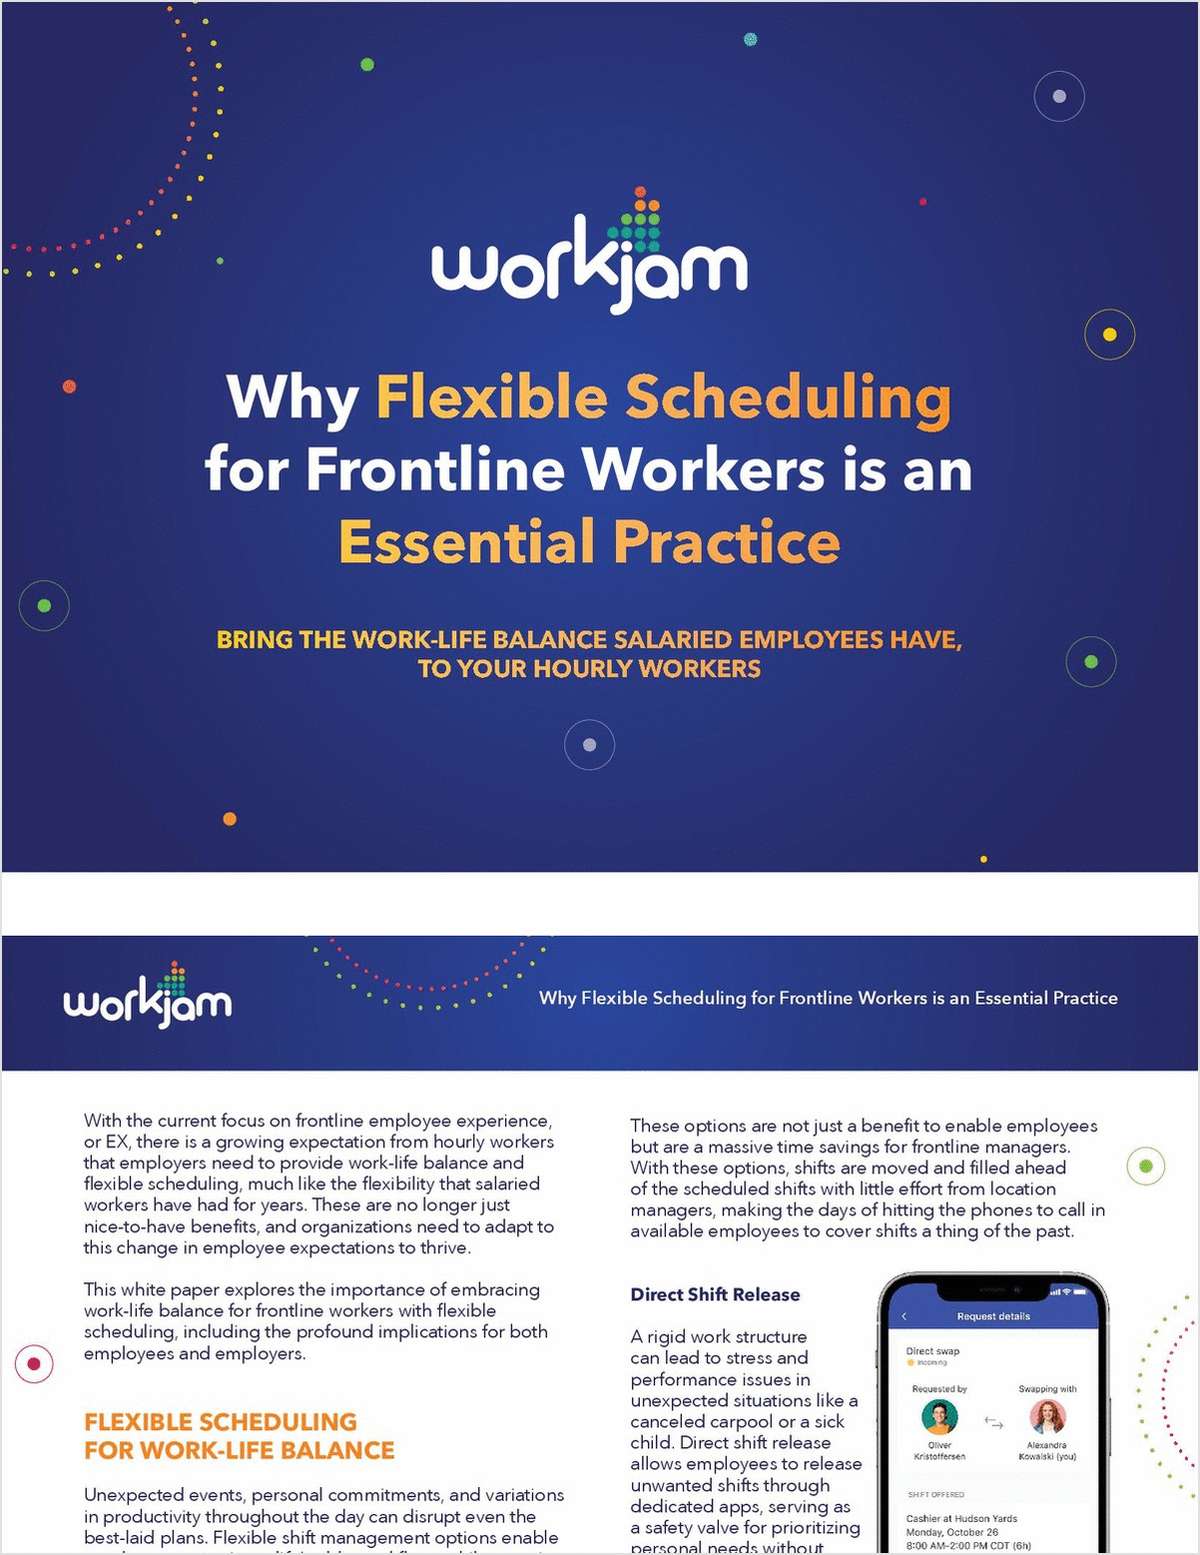 Why Flexible Scheduling for Frontline Workers is an Essential Practice